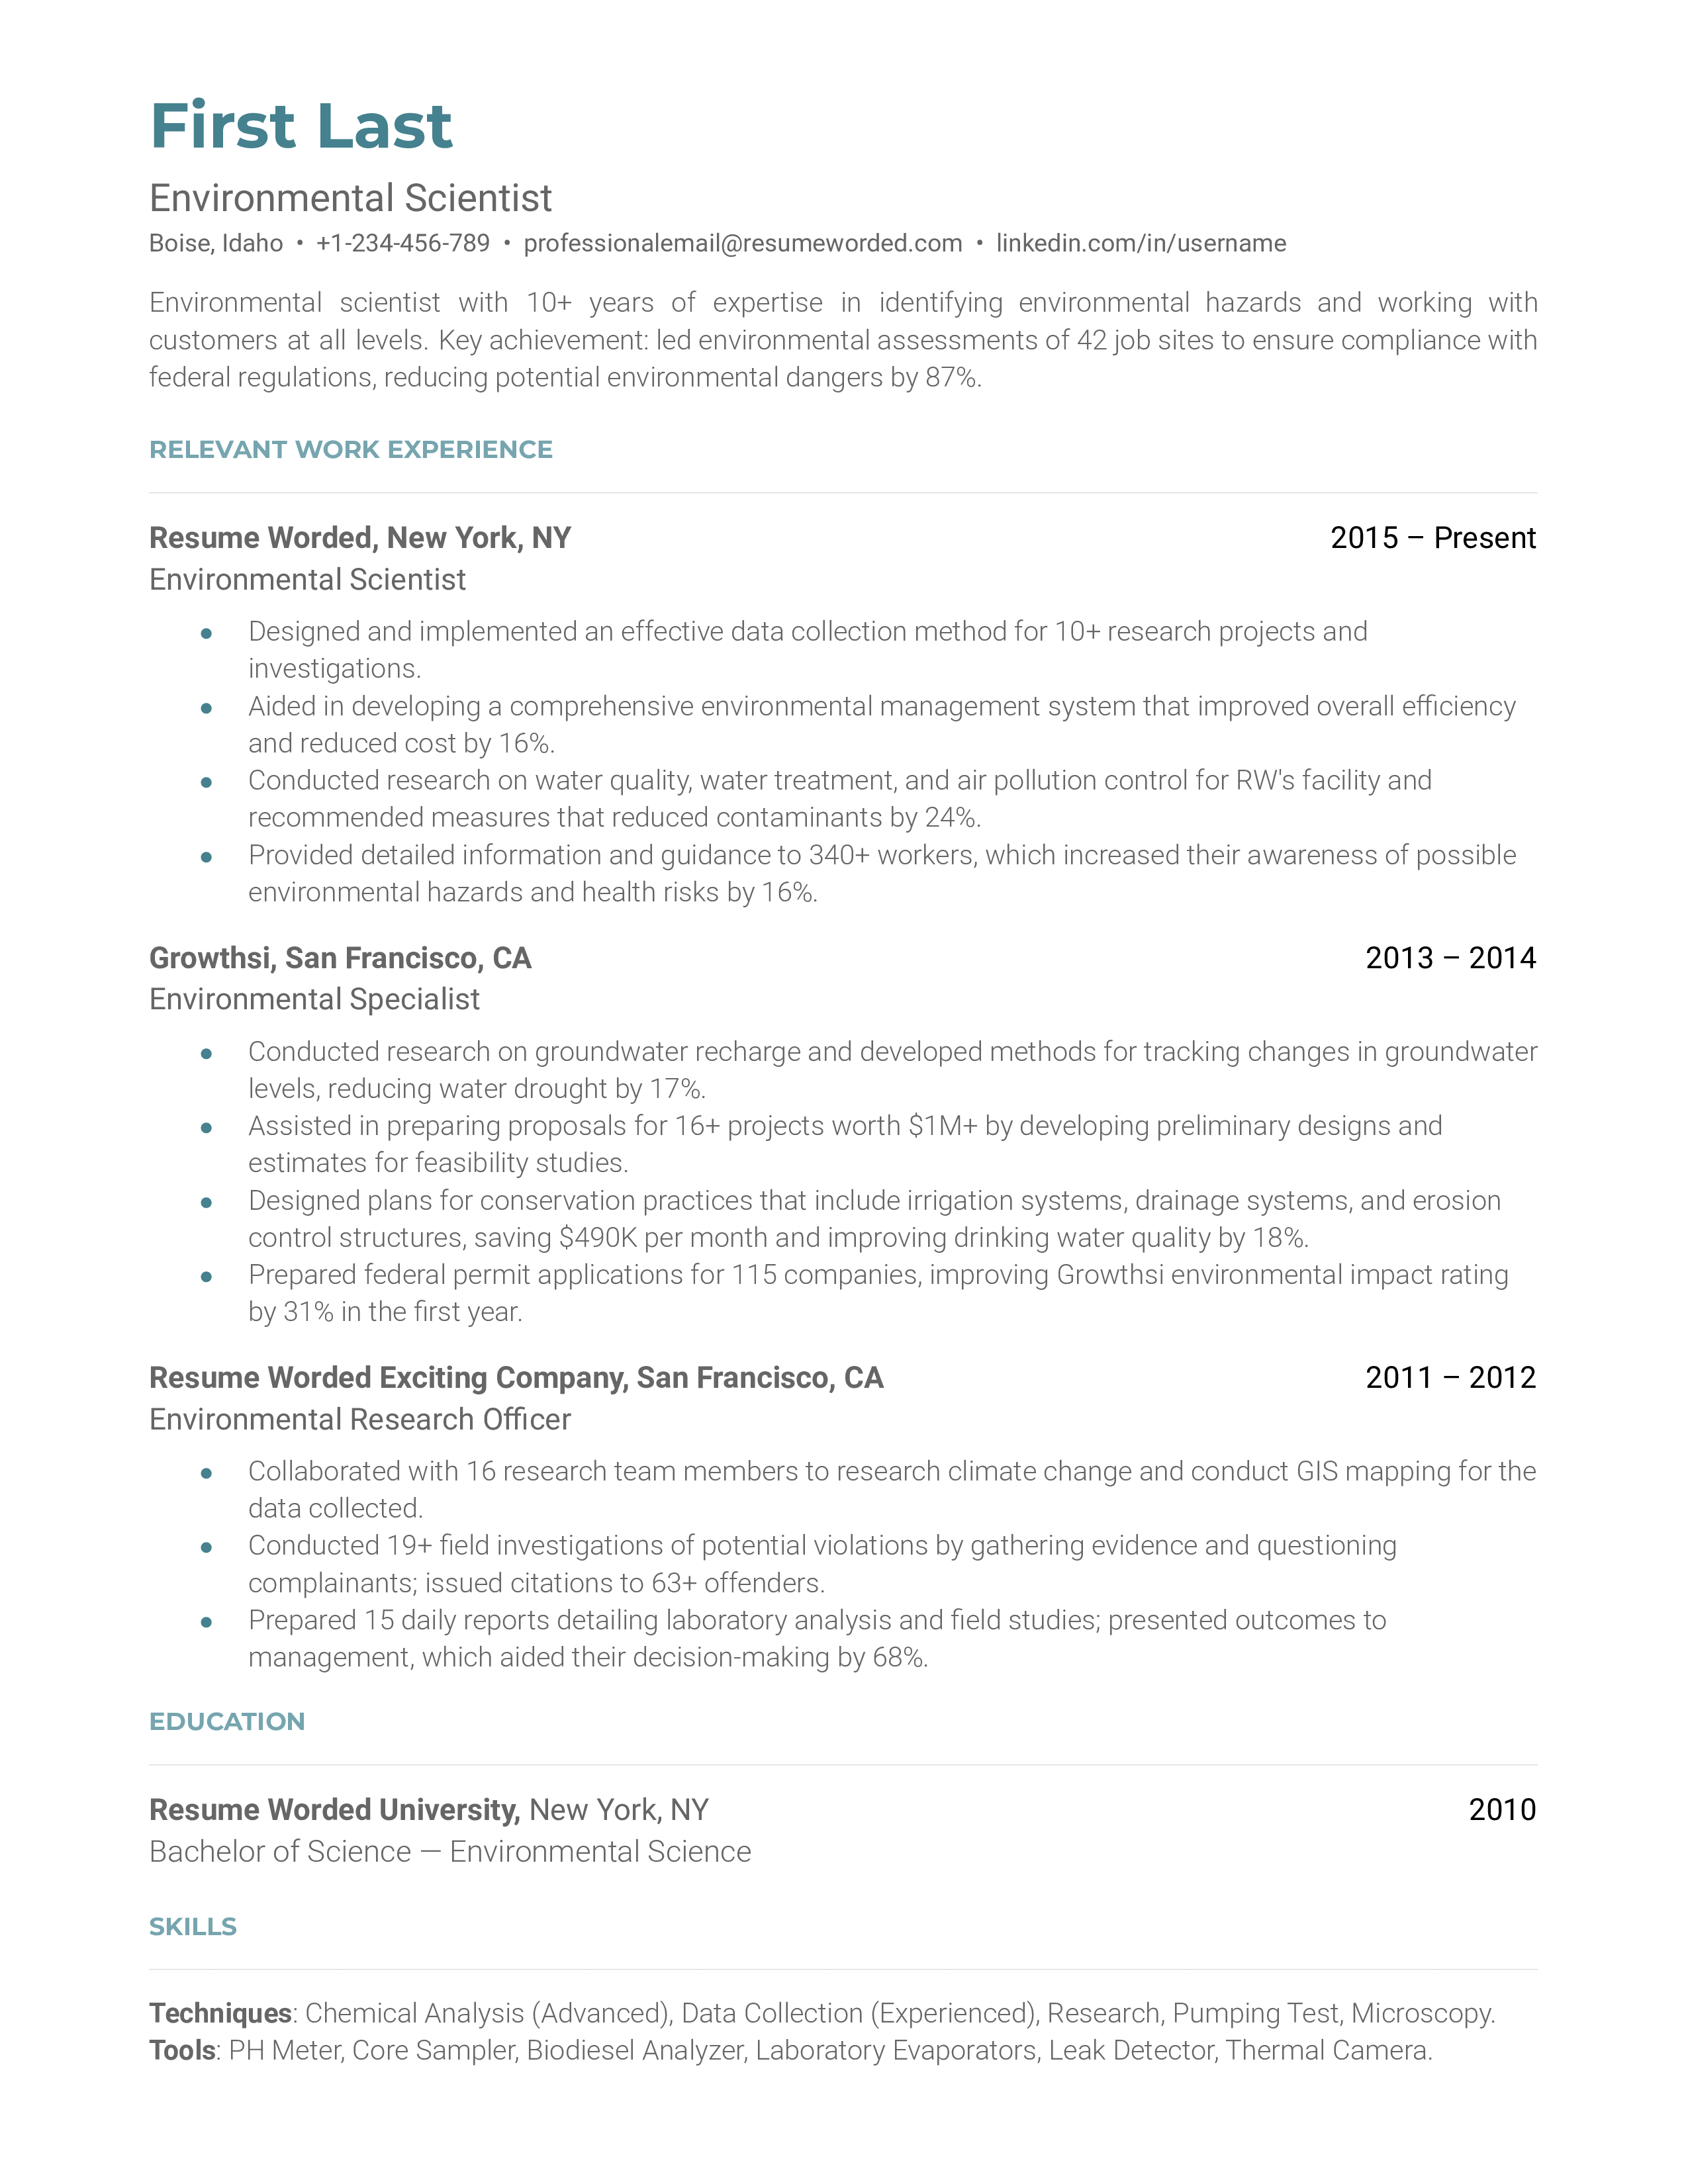 An environmental scientist resume template that is tailored to the industry.